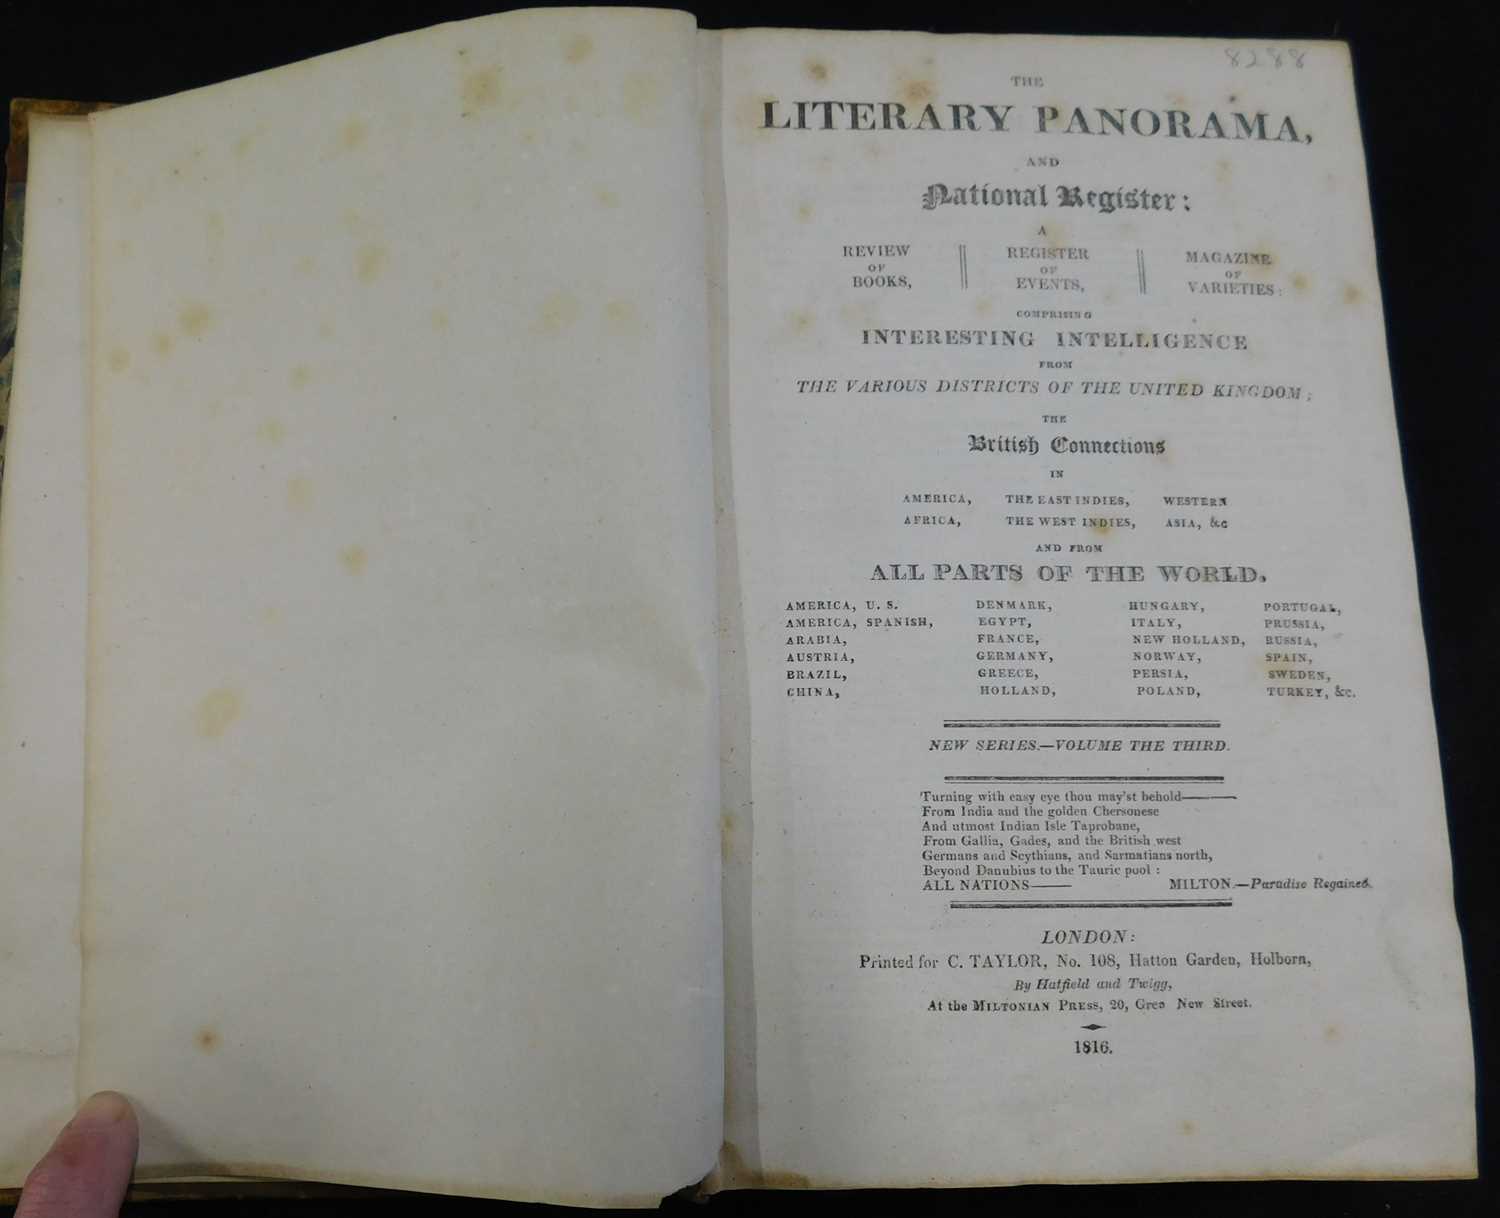 THE LITERARY PANORAMA AND NATIONAL REGISTER..., London for C Taylor, 1814, 1816, vols 15, 18-20, old - Image 3 of 3